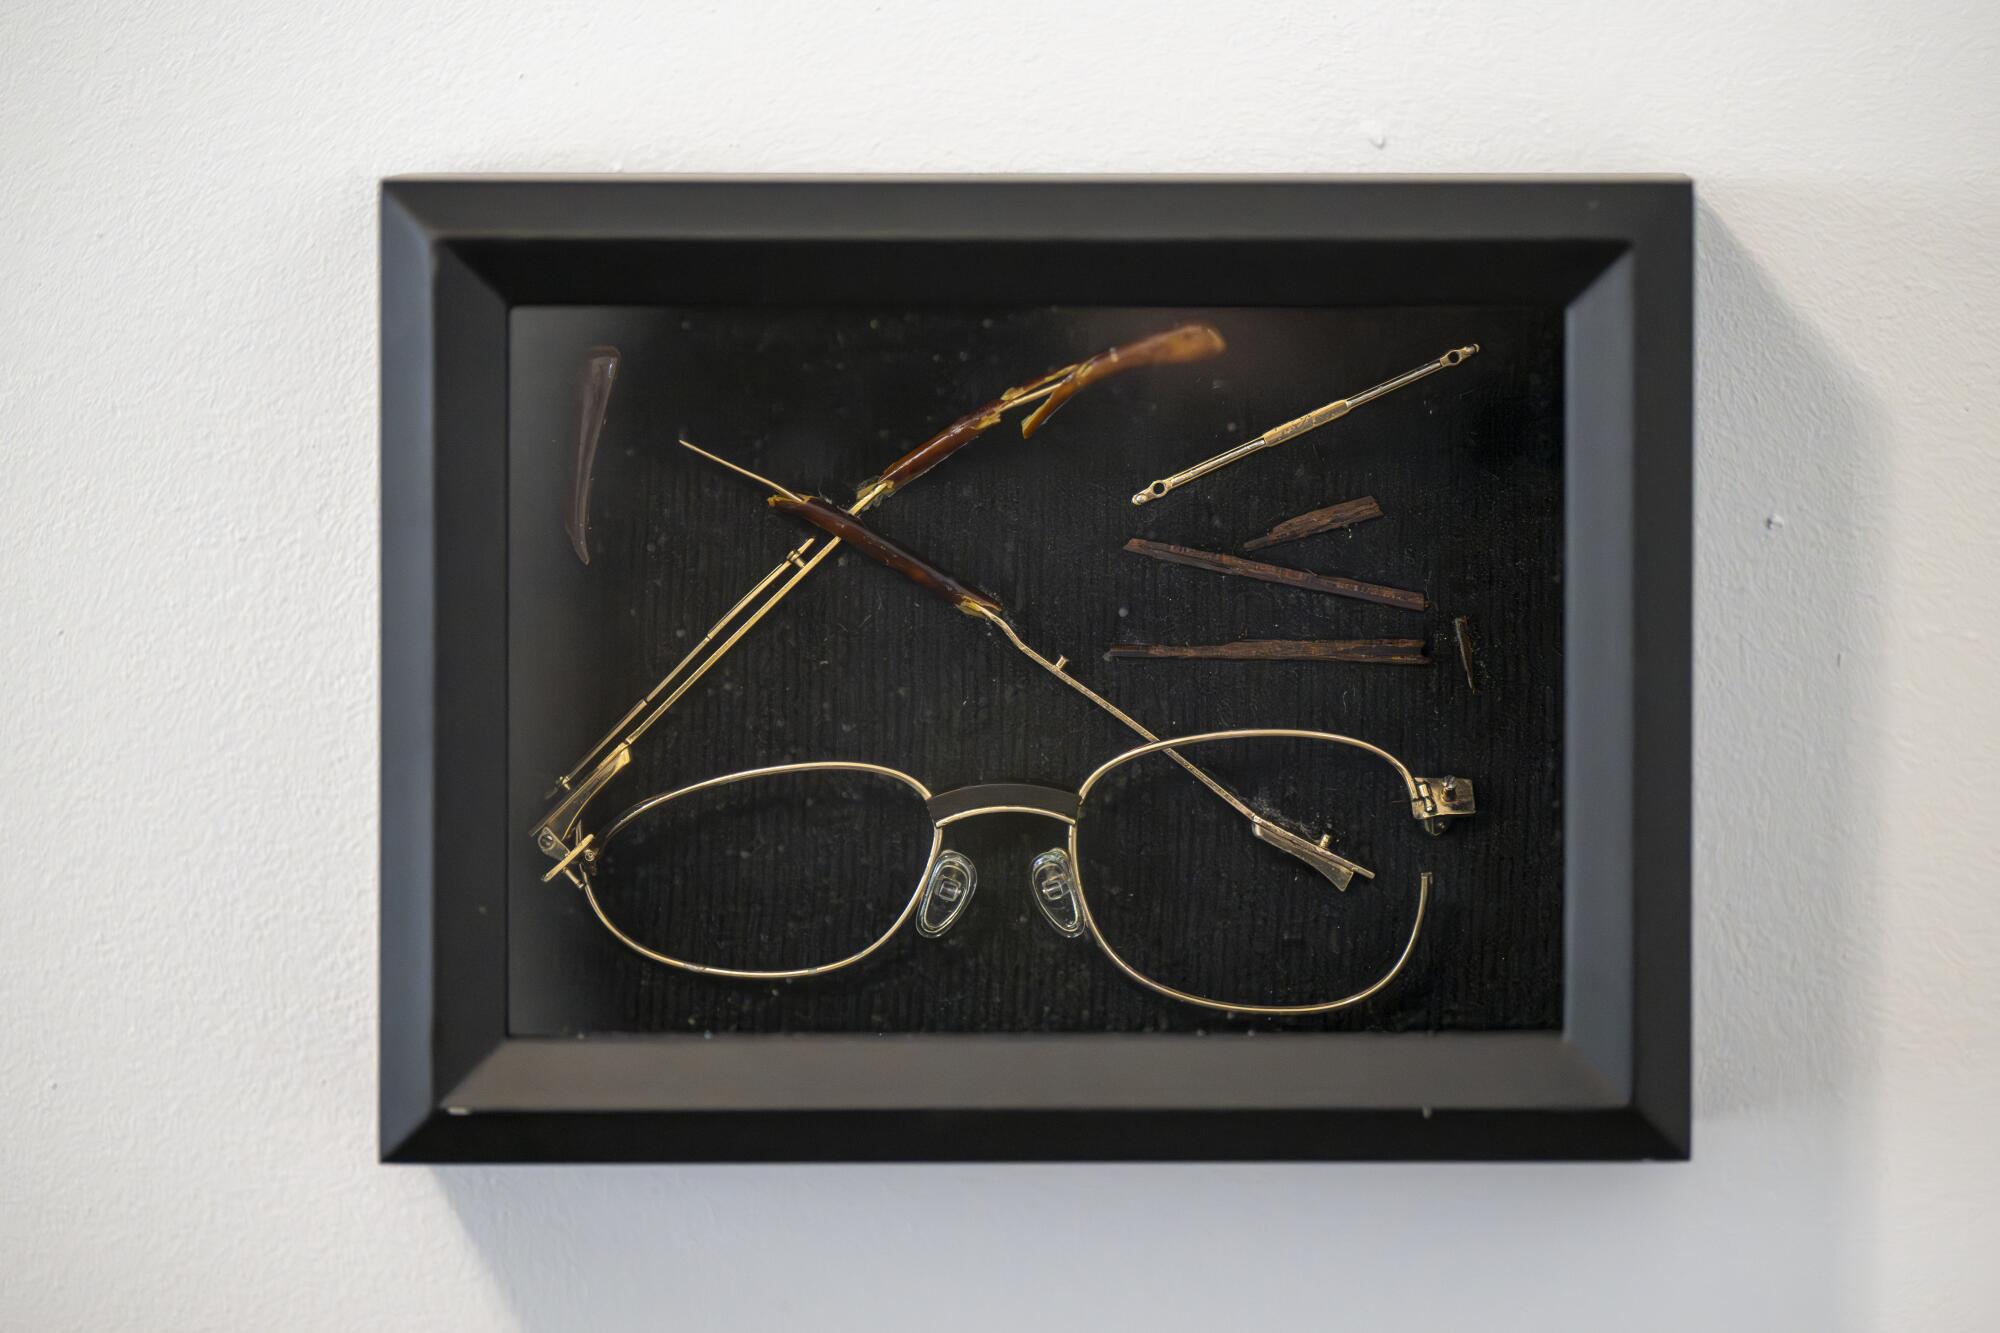 A broken pair of glasses in a frame.